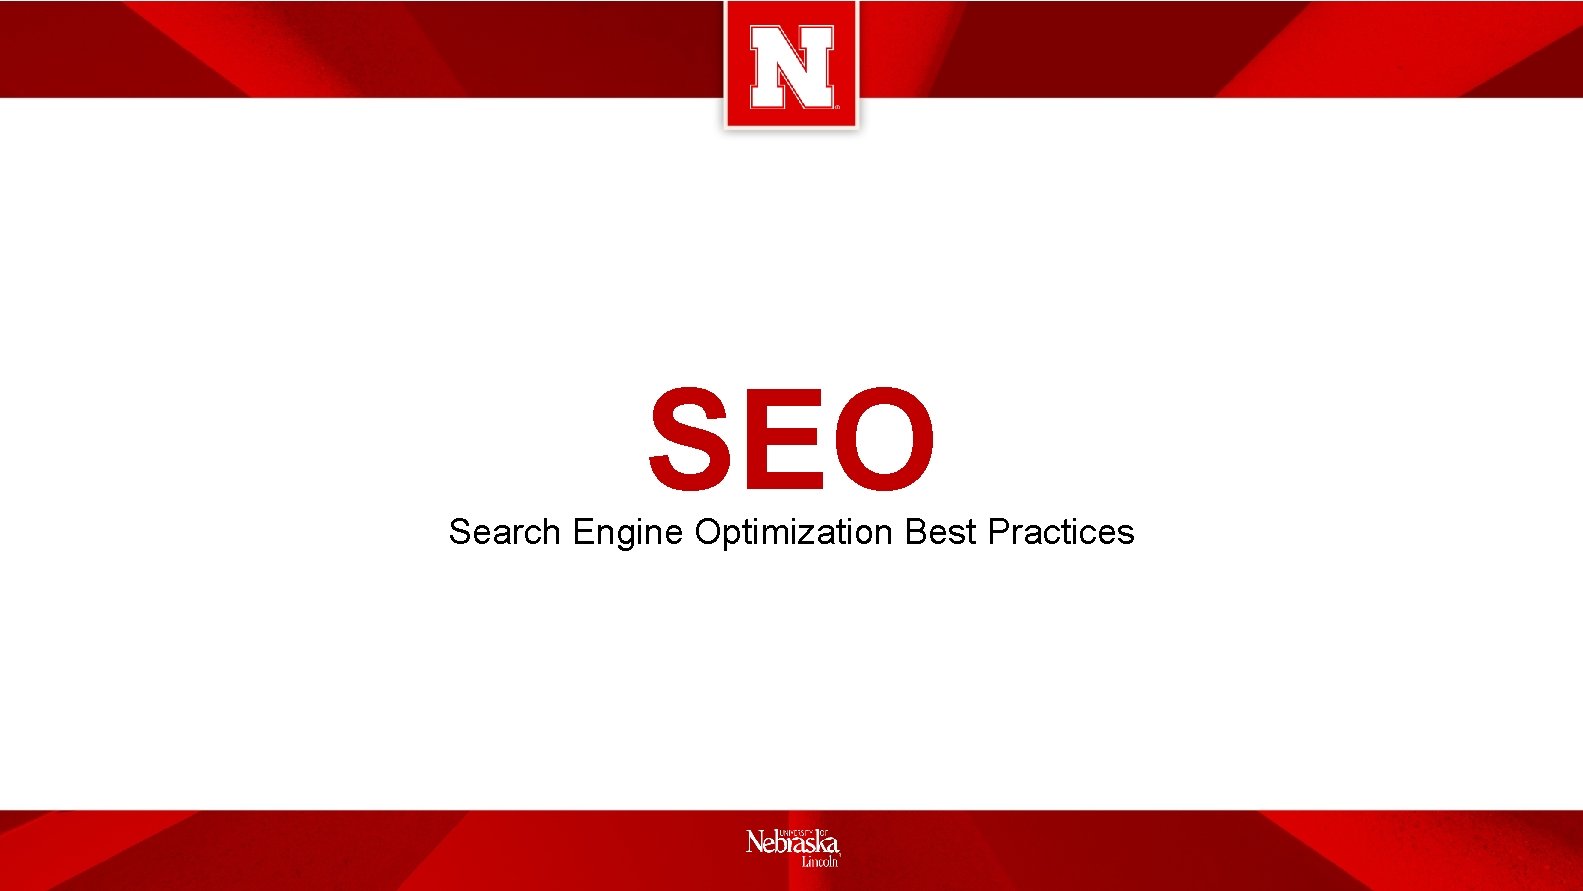 SEO Search Engine Optimization Best Practices 